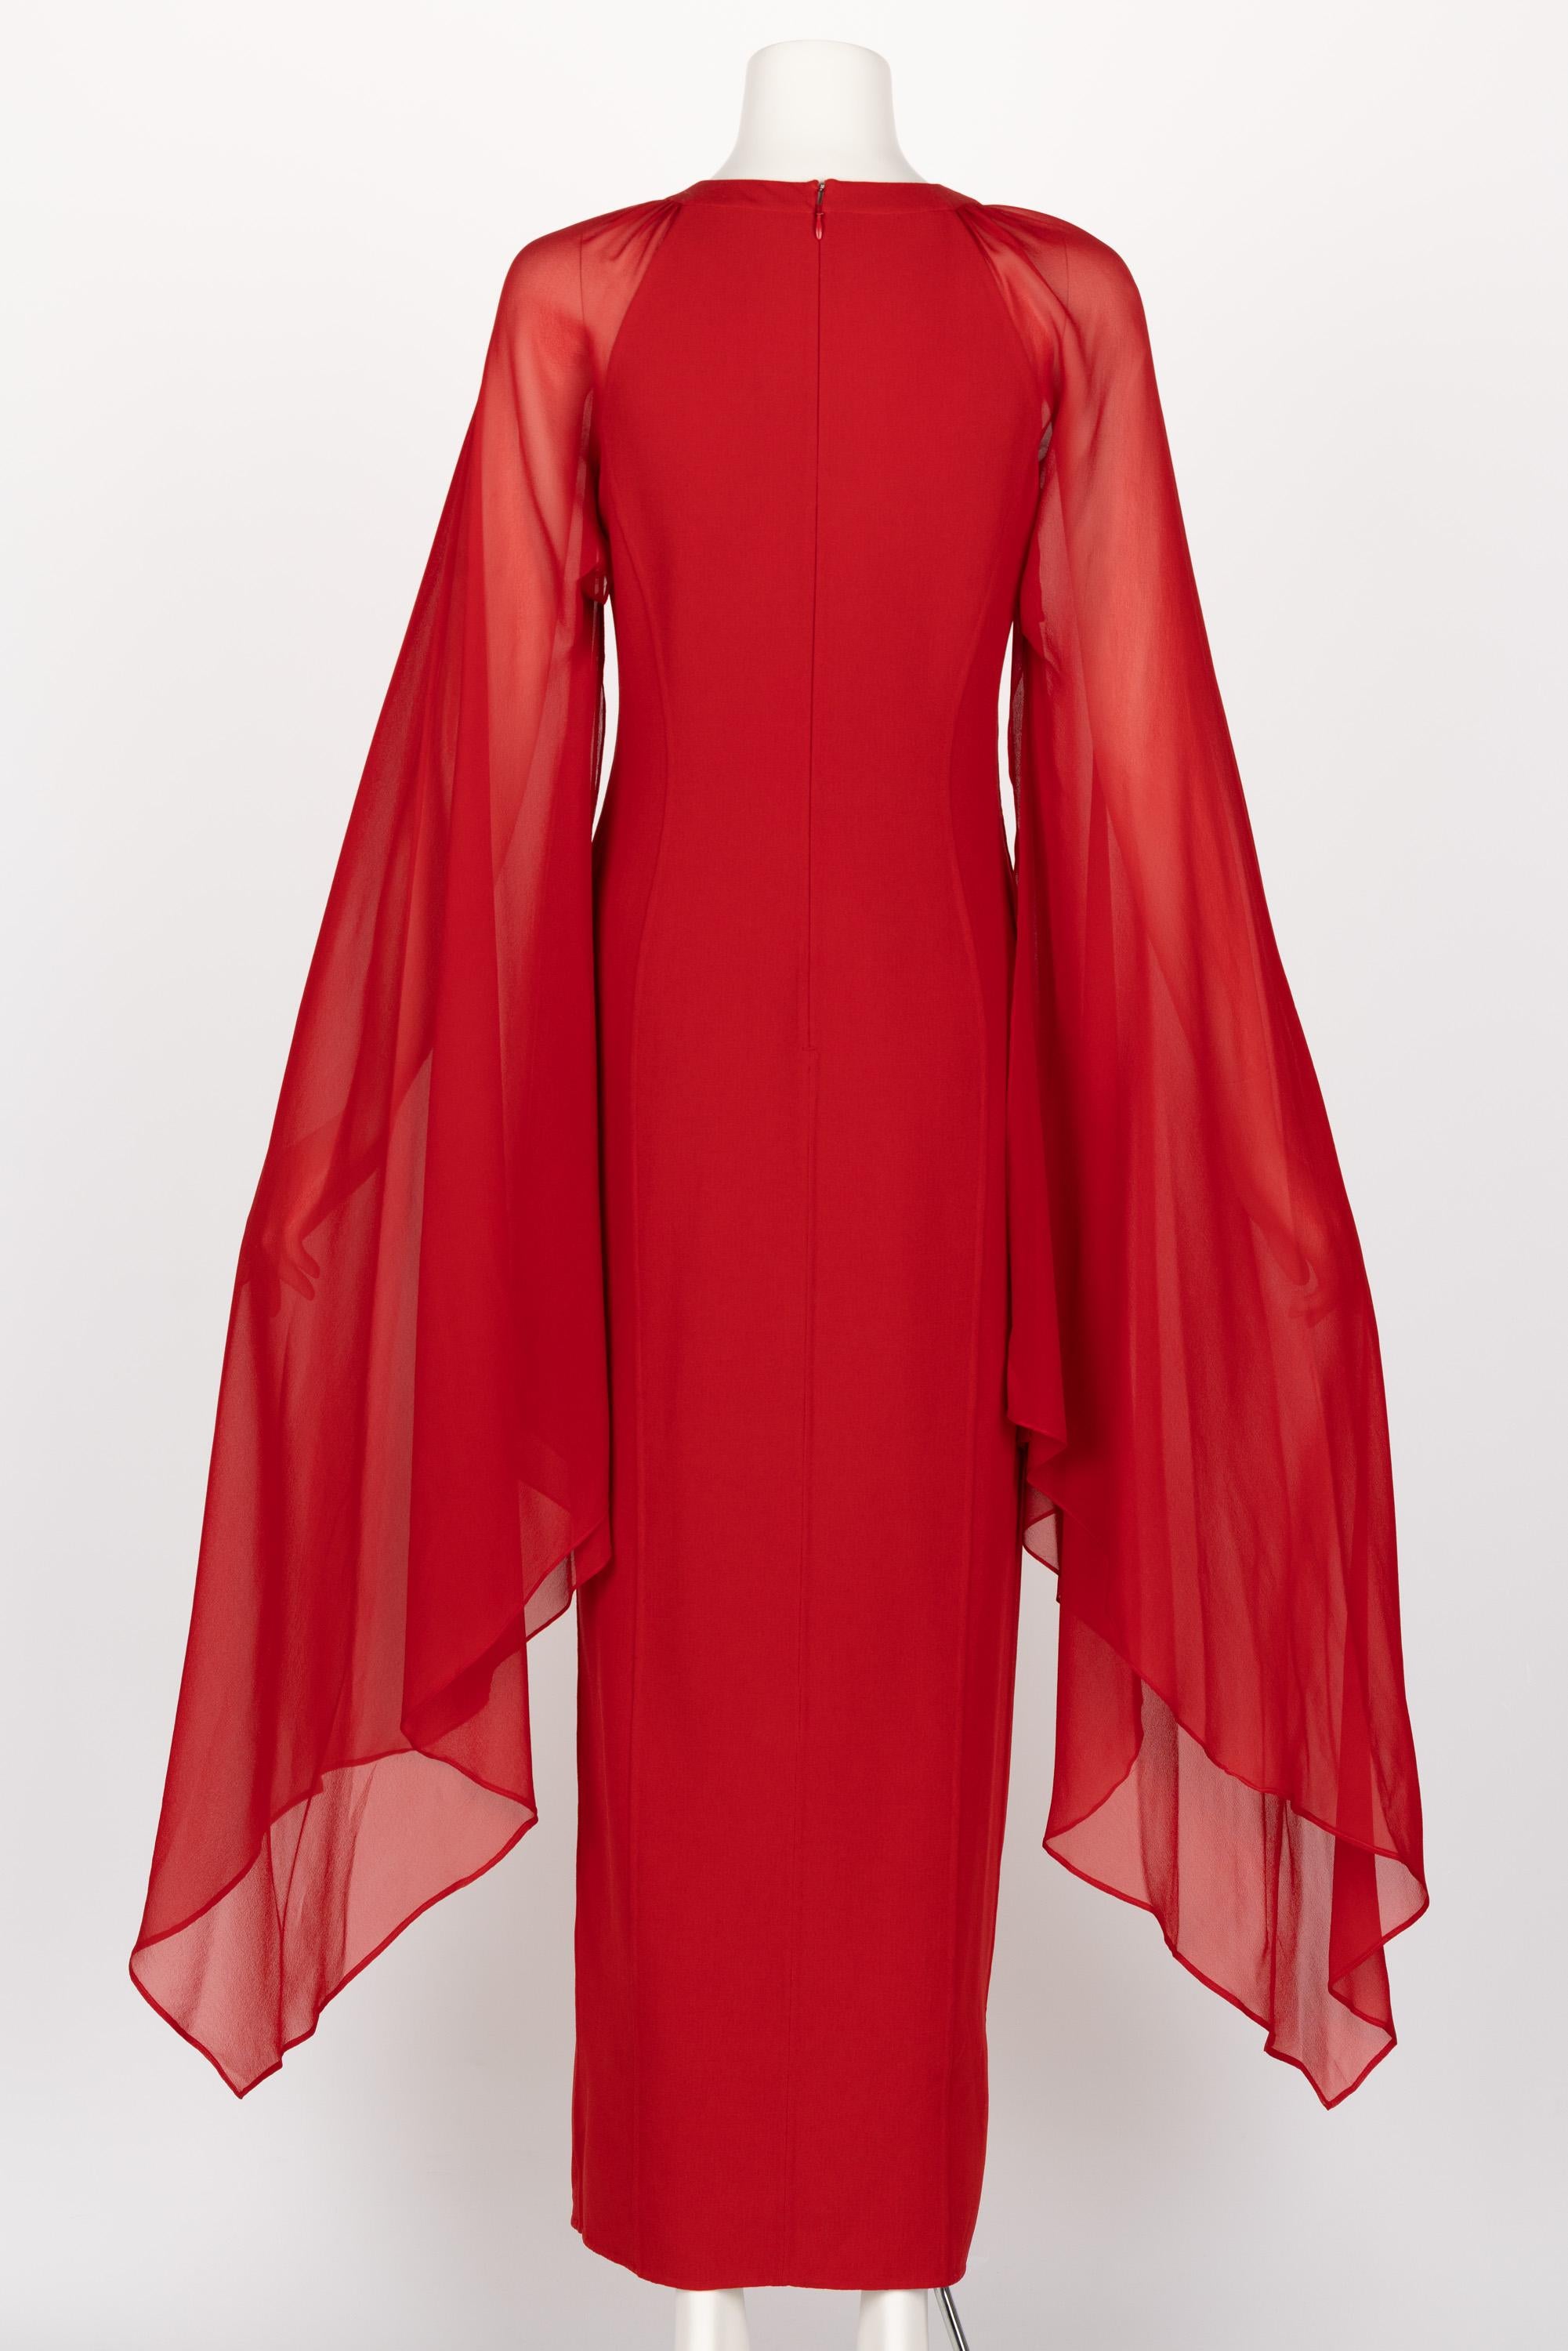 Michael Kors Collection Red Angel Sleeve Dress In Excellent Condition For Sale In Boca Raton, FL